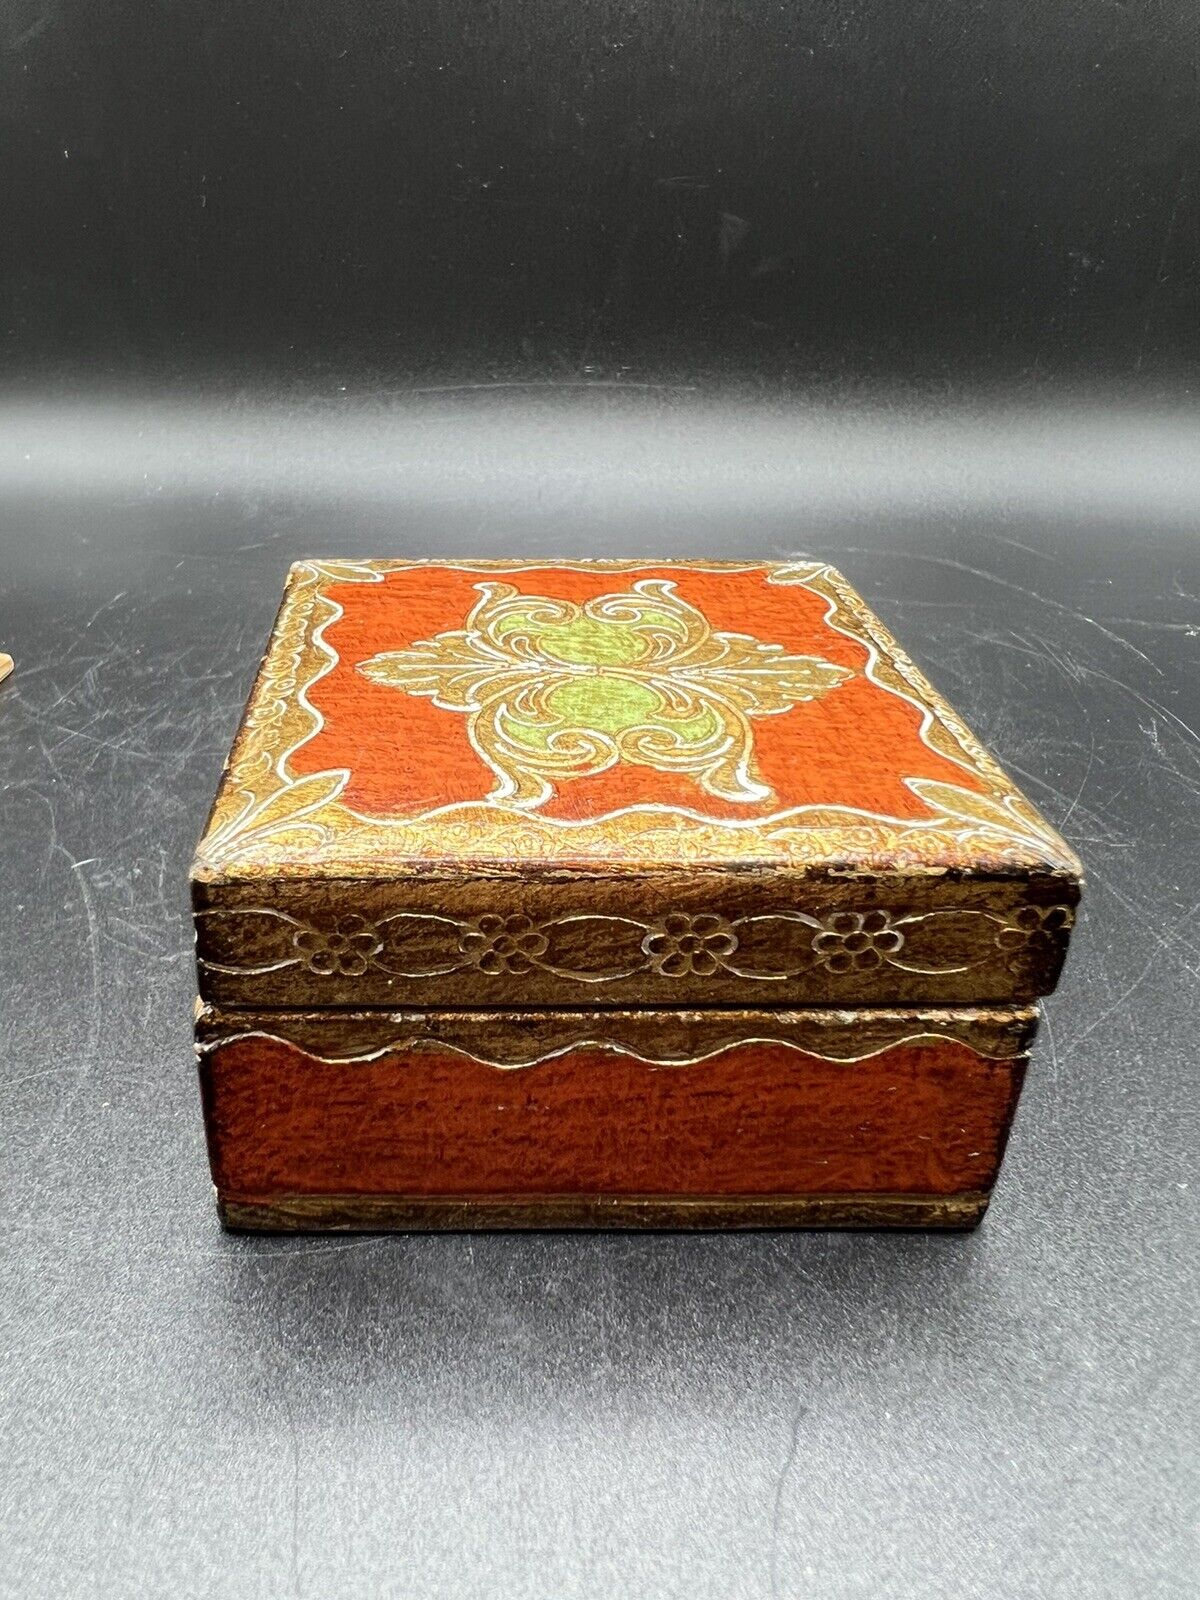 Florentine Hand Made Wooden Jewelry, Trinket Box Made In Italy Vintage 